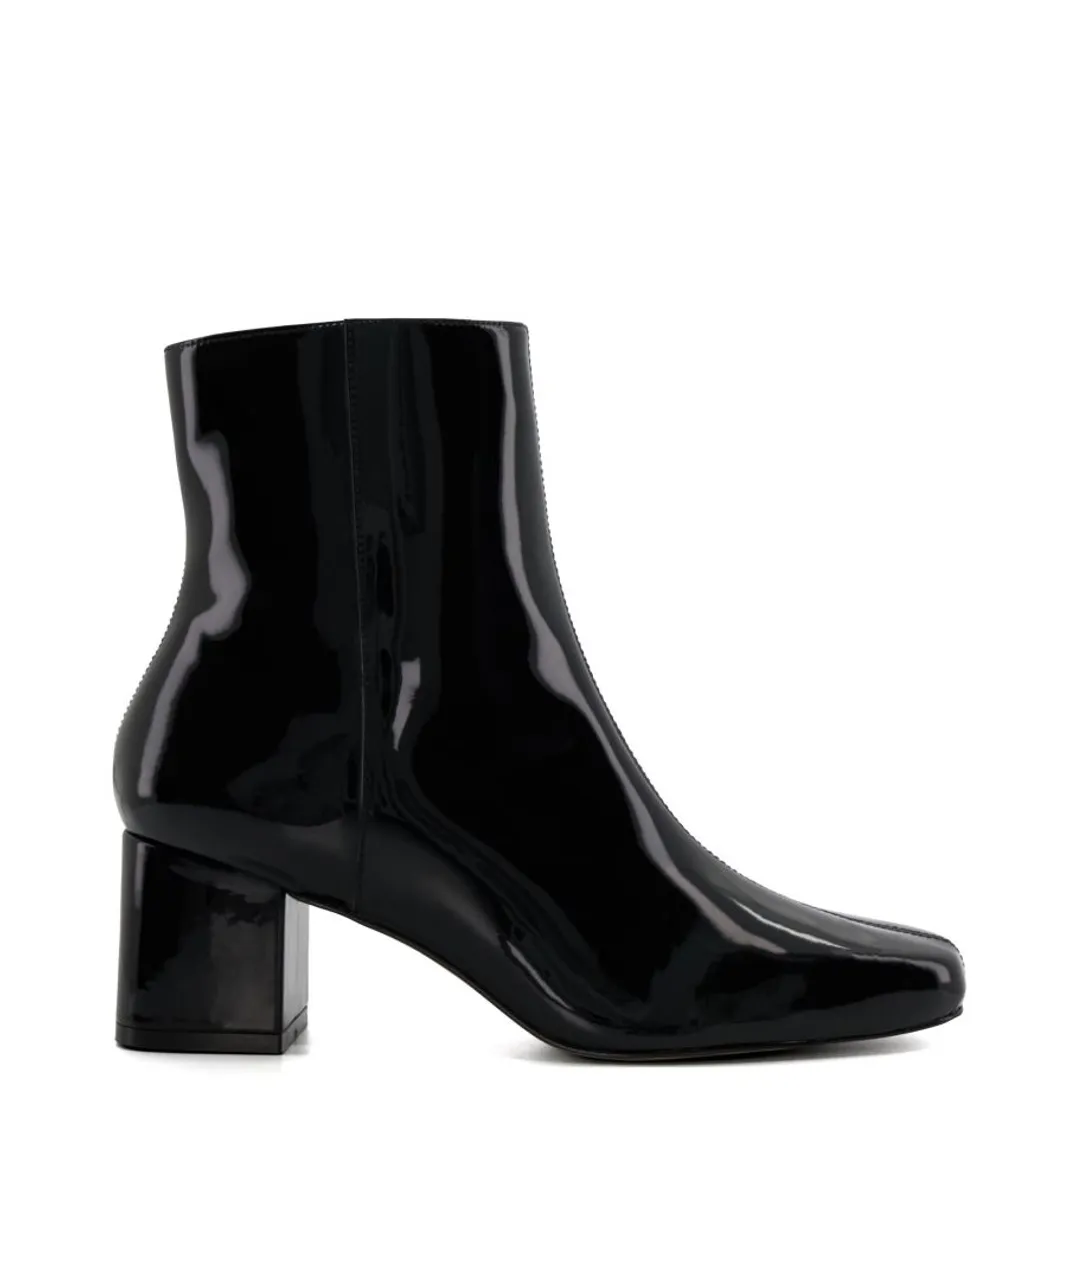 Dune London Womens Ladies Onsen - Metal-Pleated Block-Heel Ankle Boots - Black Leather (archived)